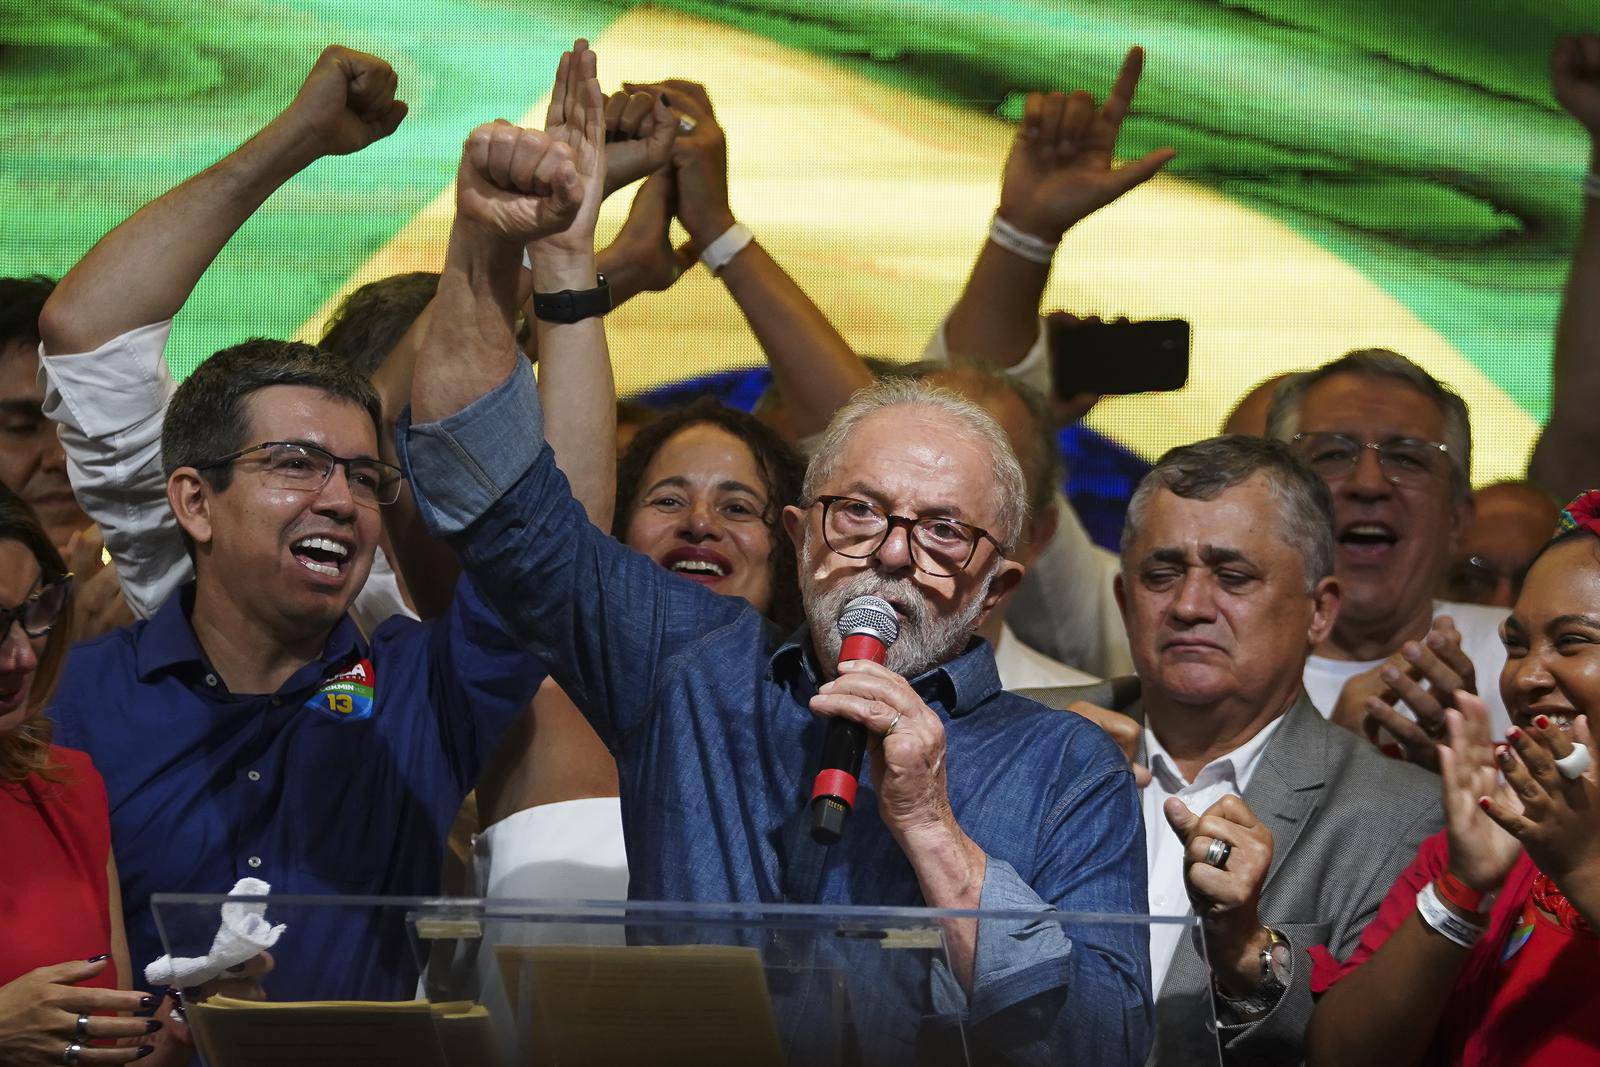 Elections in Brazil